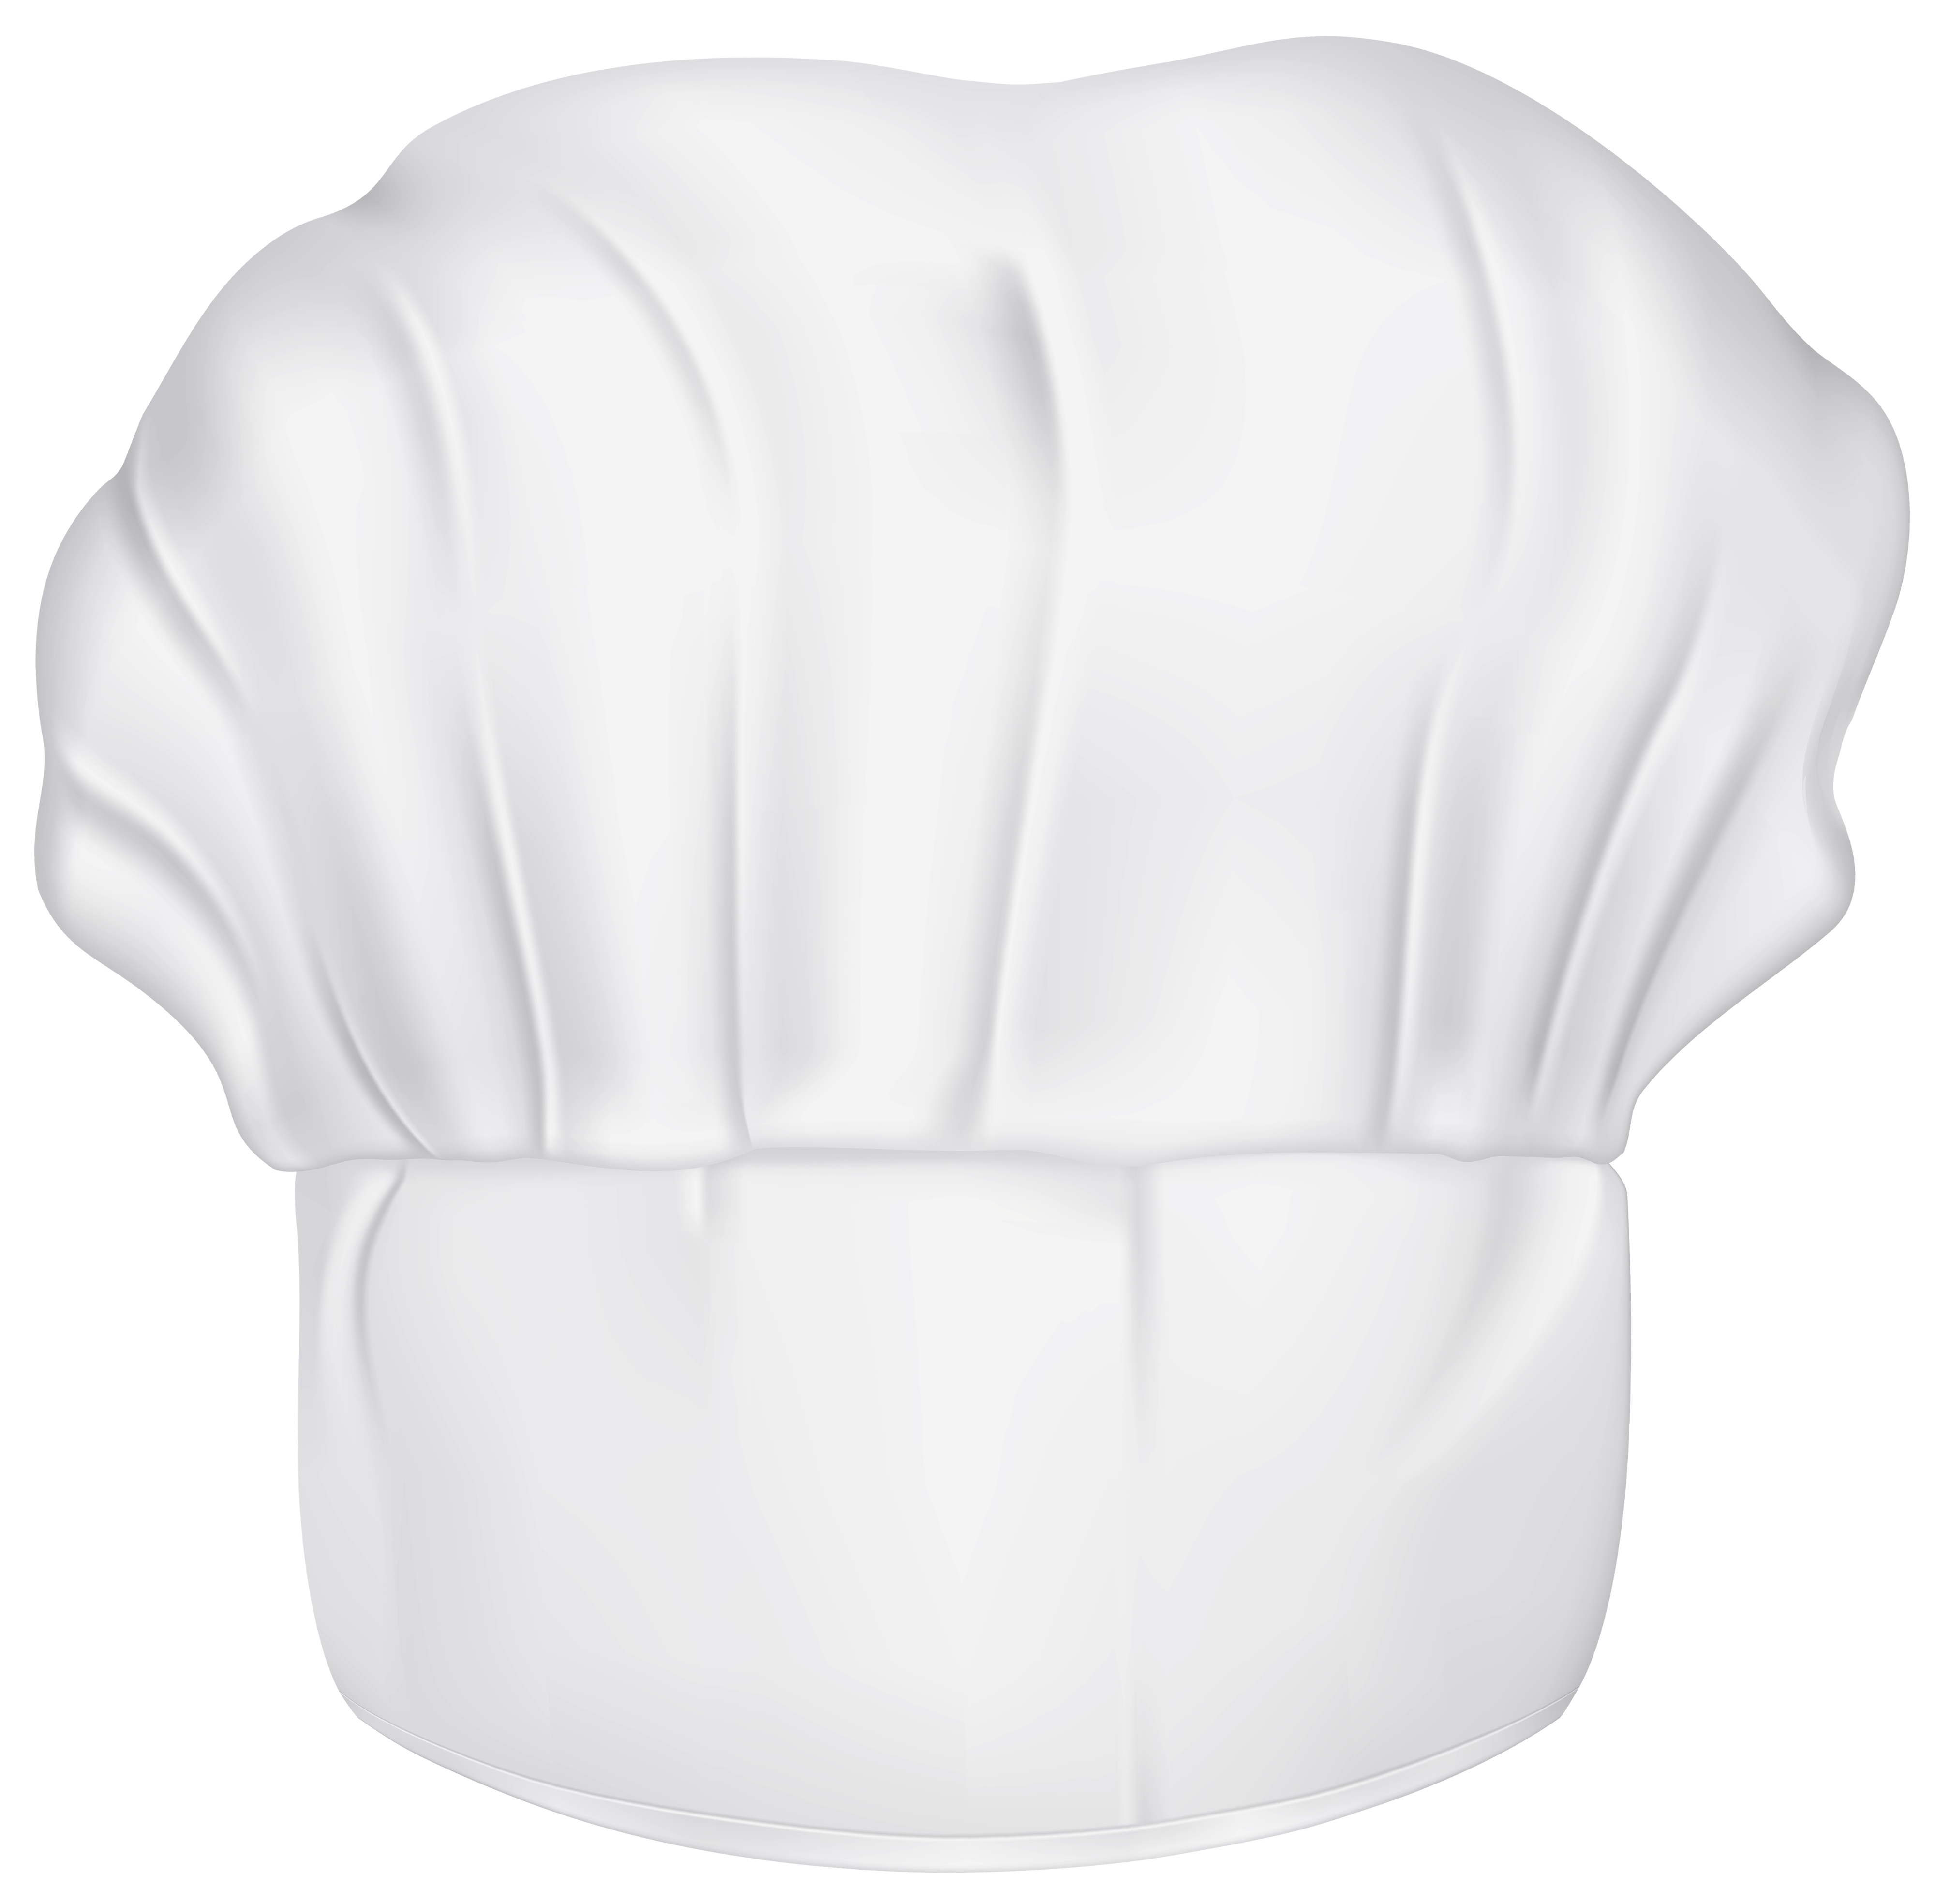 chef hat clipart download - photo #47